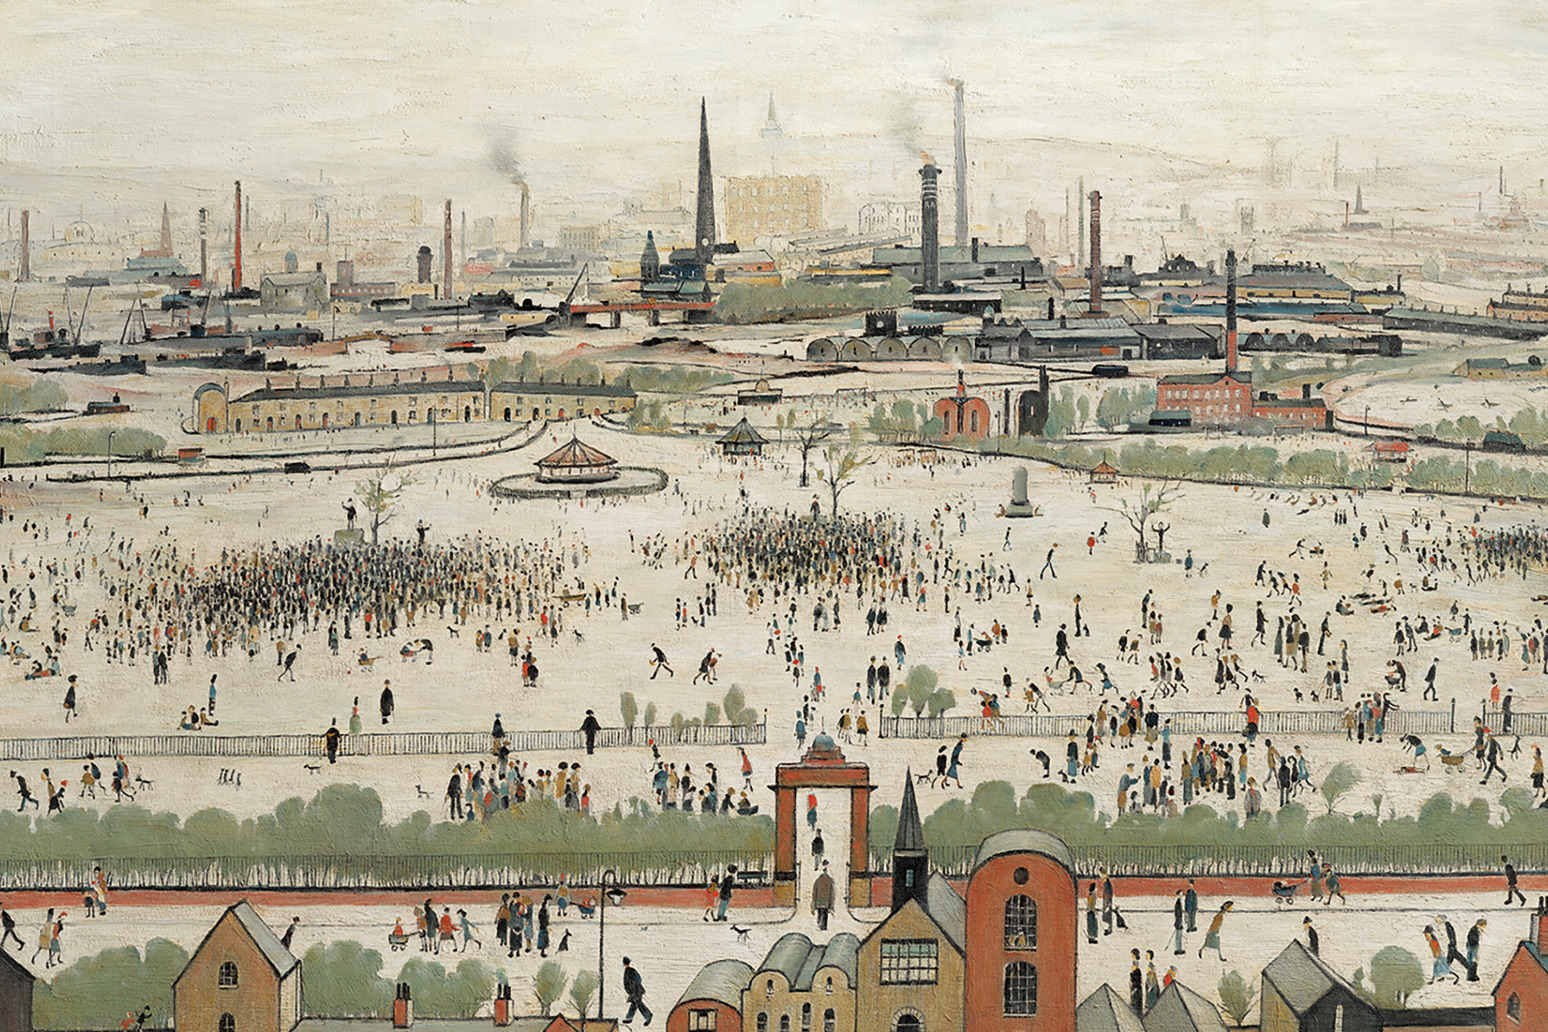 Lowry’s Sunday Afternoon to be publicly displayed 